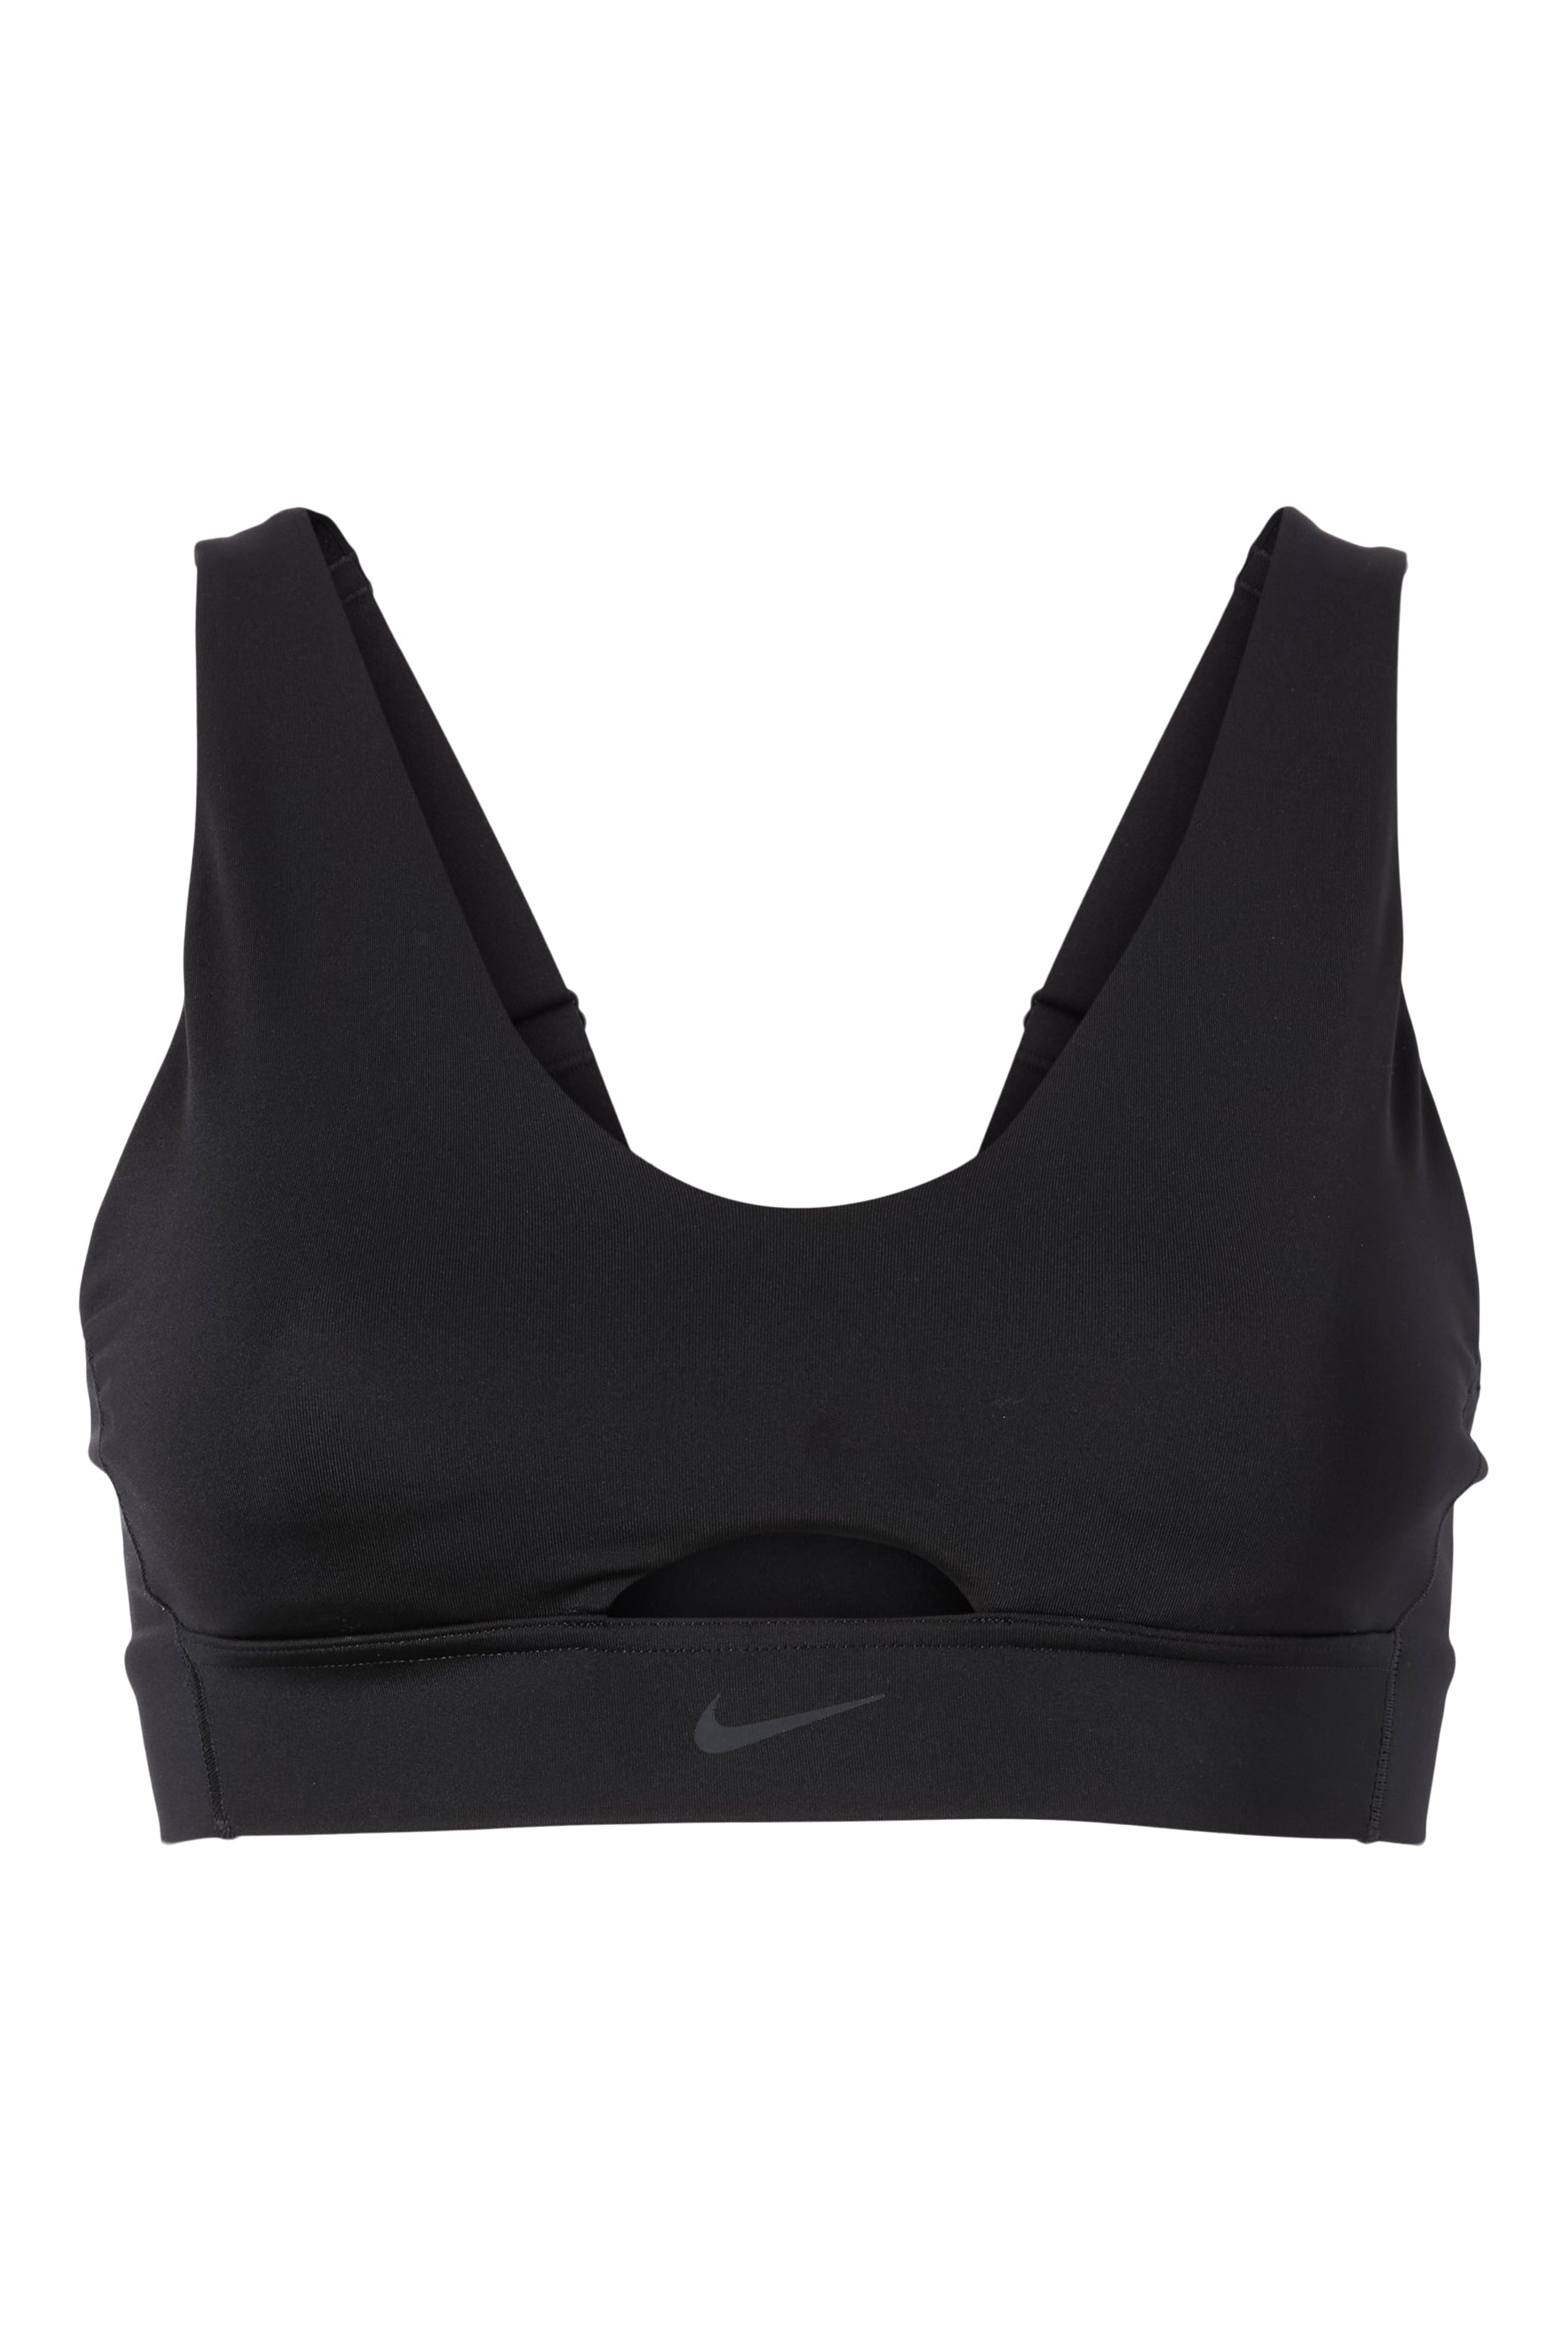 NIKE AIR INDY WOMENS LIGHT SUPPORT WOMENS SPORTS BRA SIZE XS